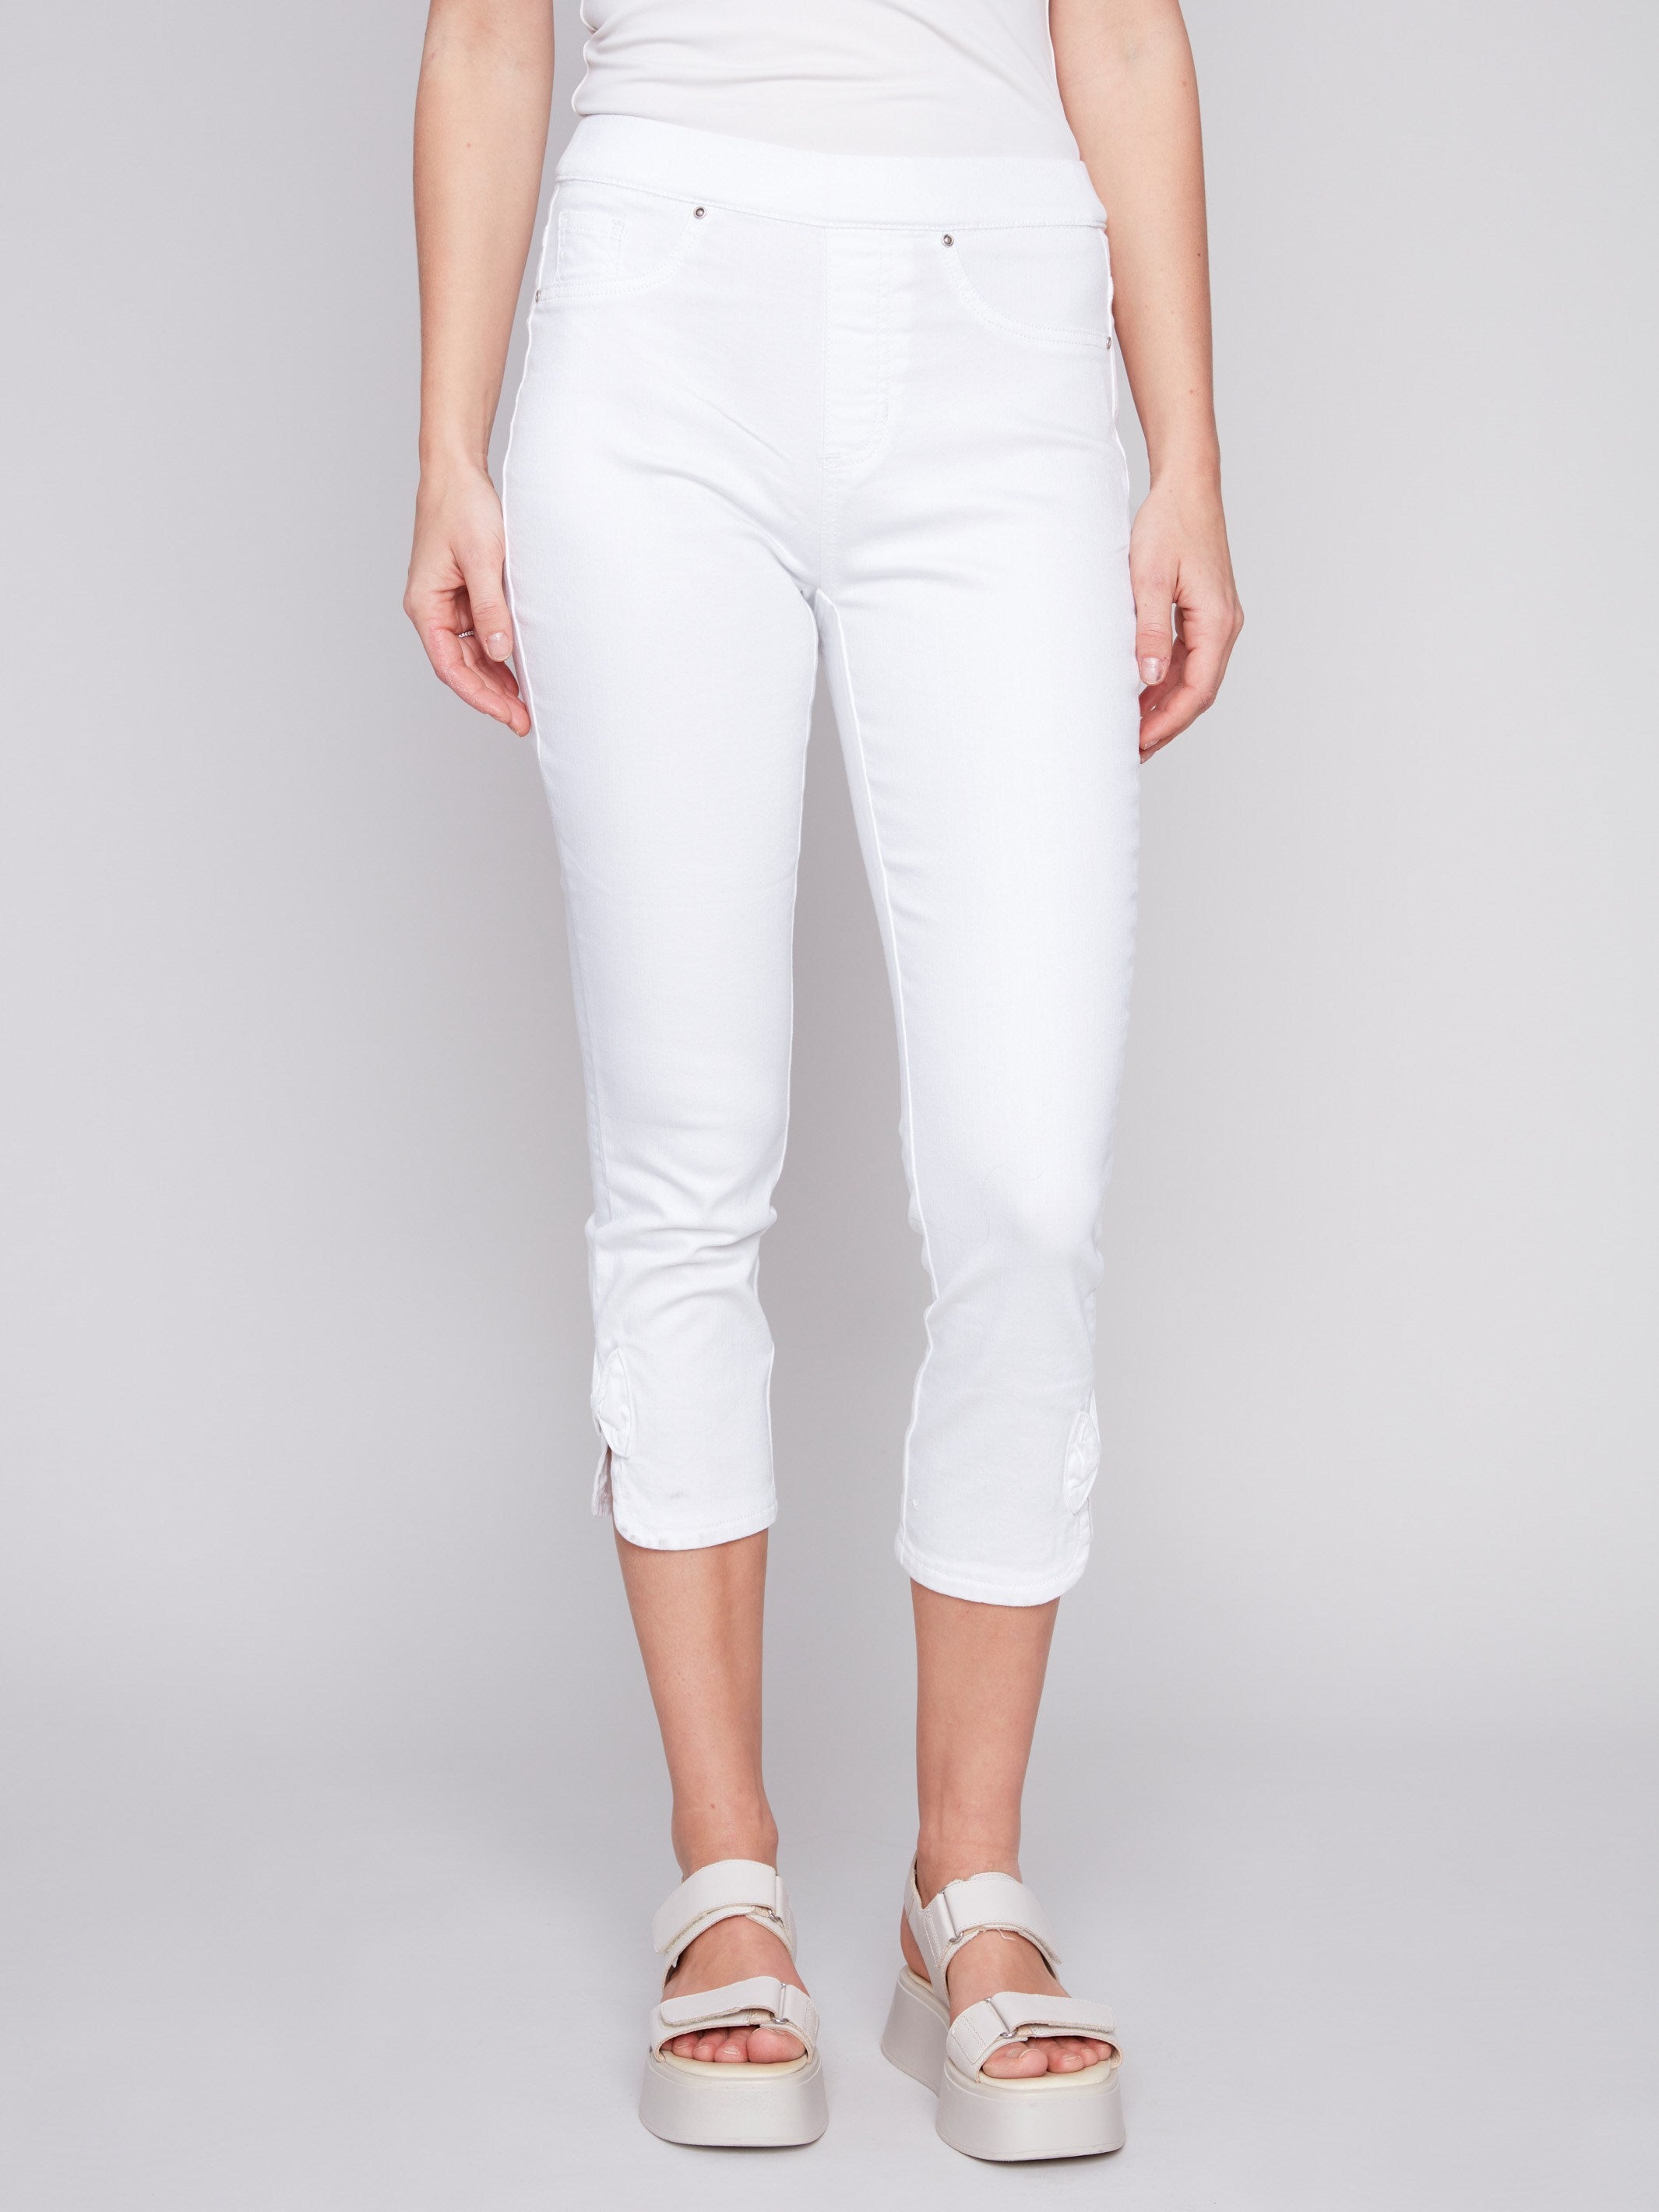 Pull-On Jeans with Bow Detail - White - Charlie B Collection Canada - Image 2